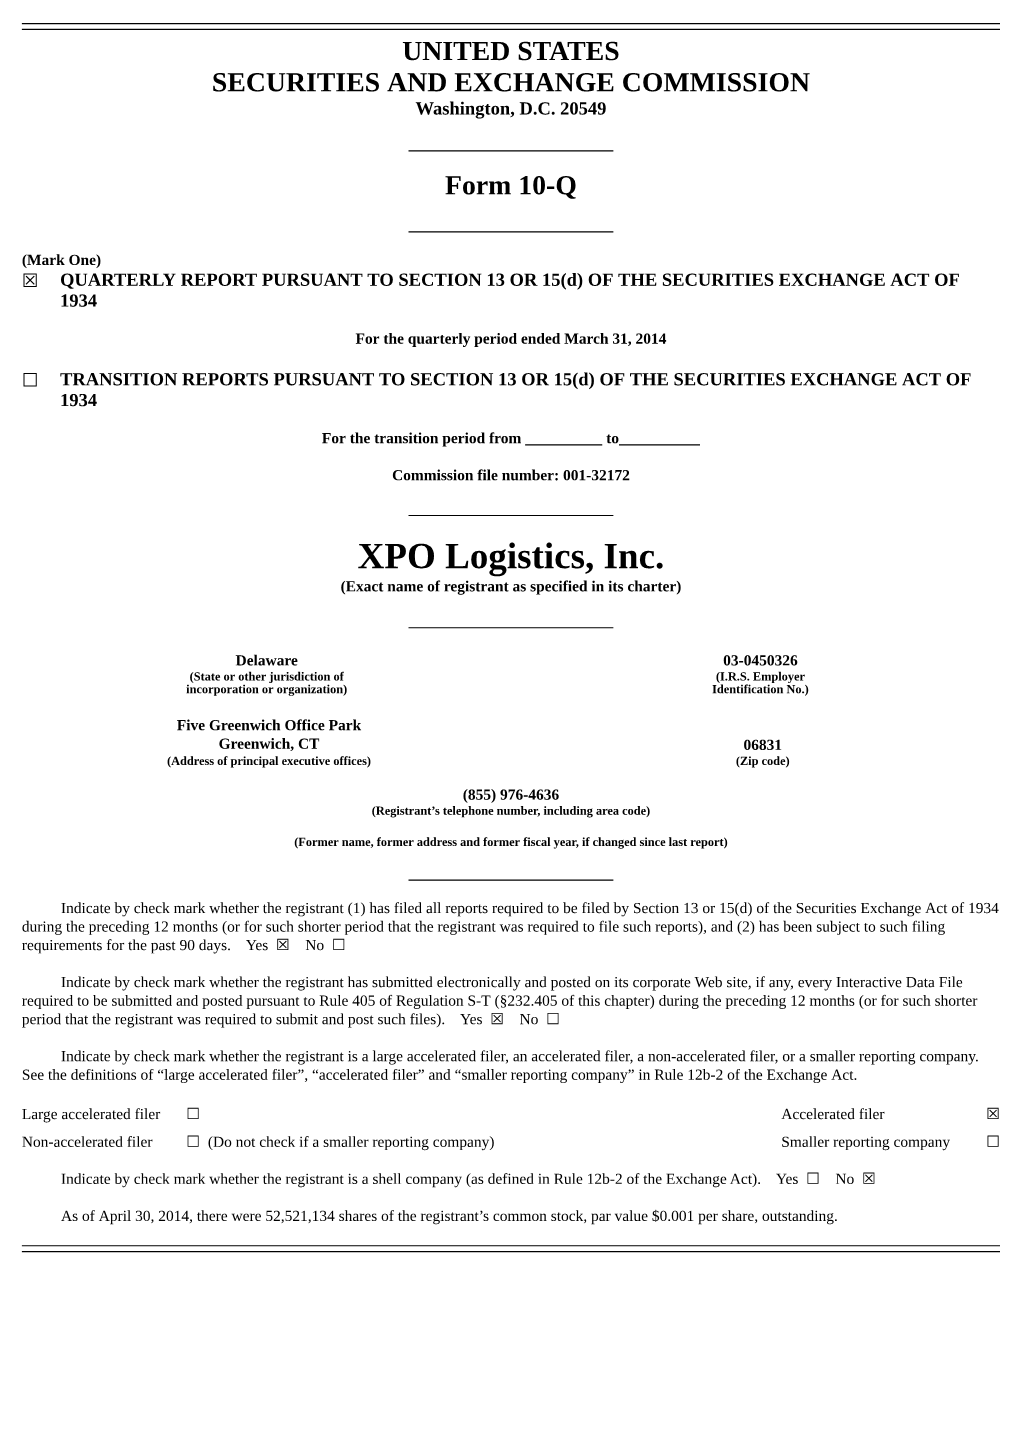 XPO Logistics, Inc. (Exact Name of Registrant As Specified in Its Charter)